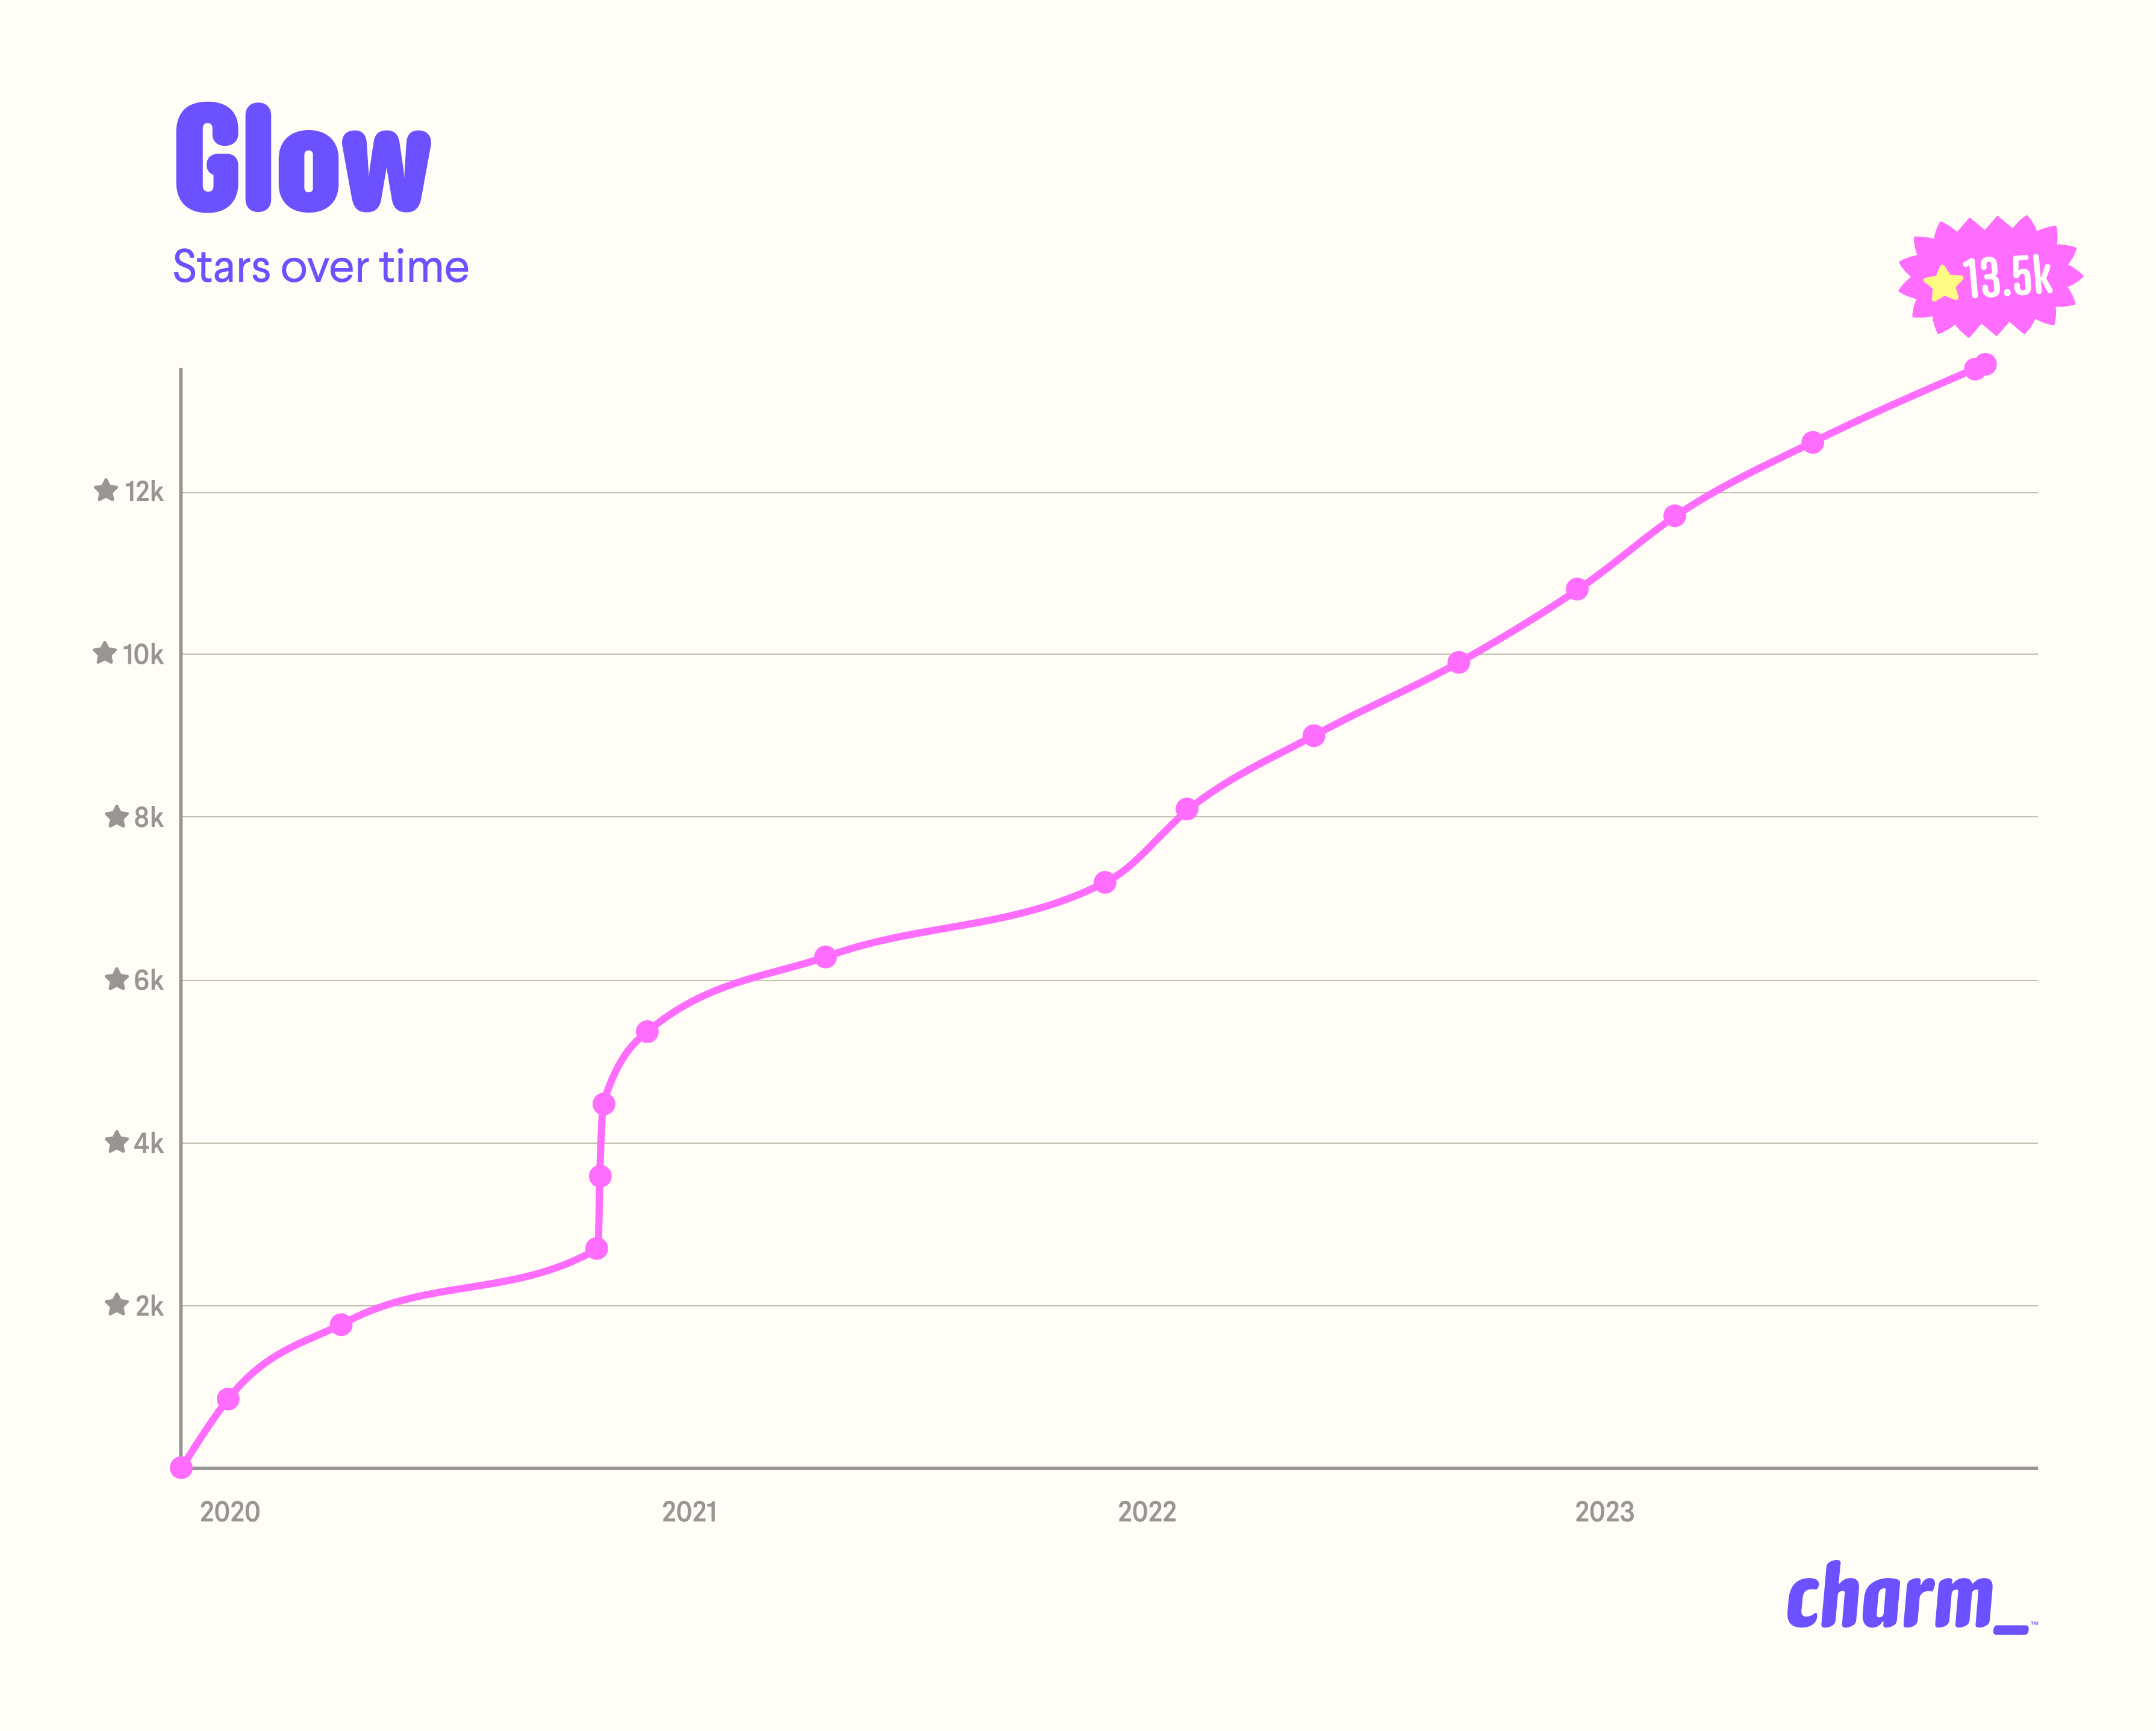 Chart showing Glow star growth over time